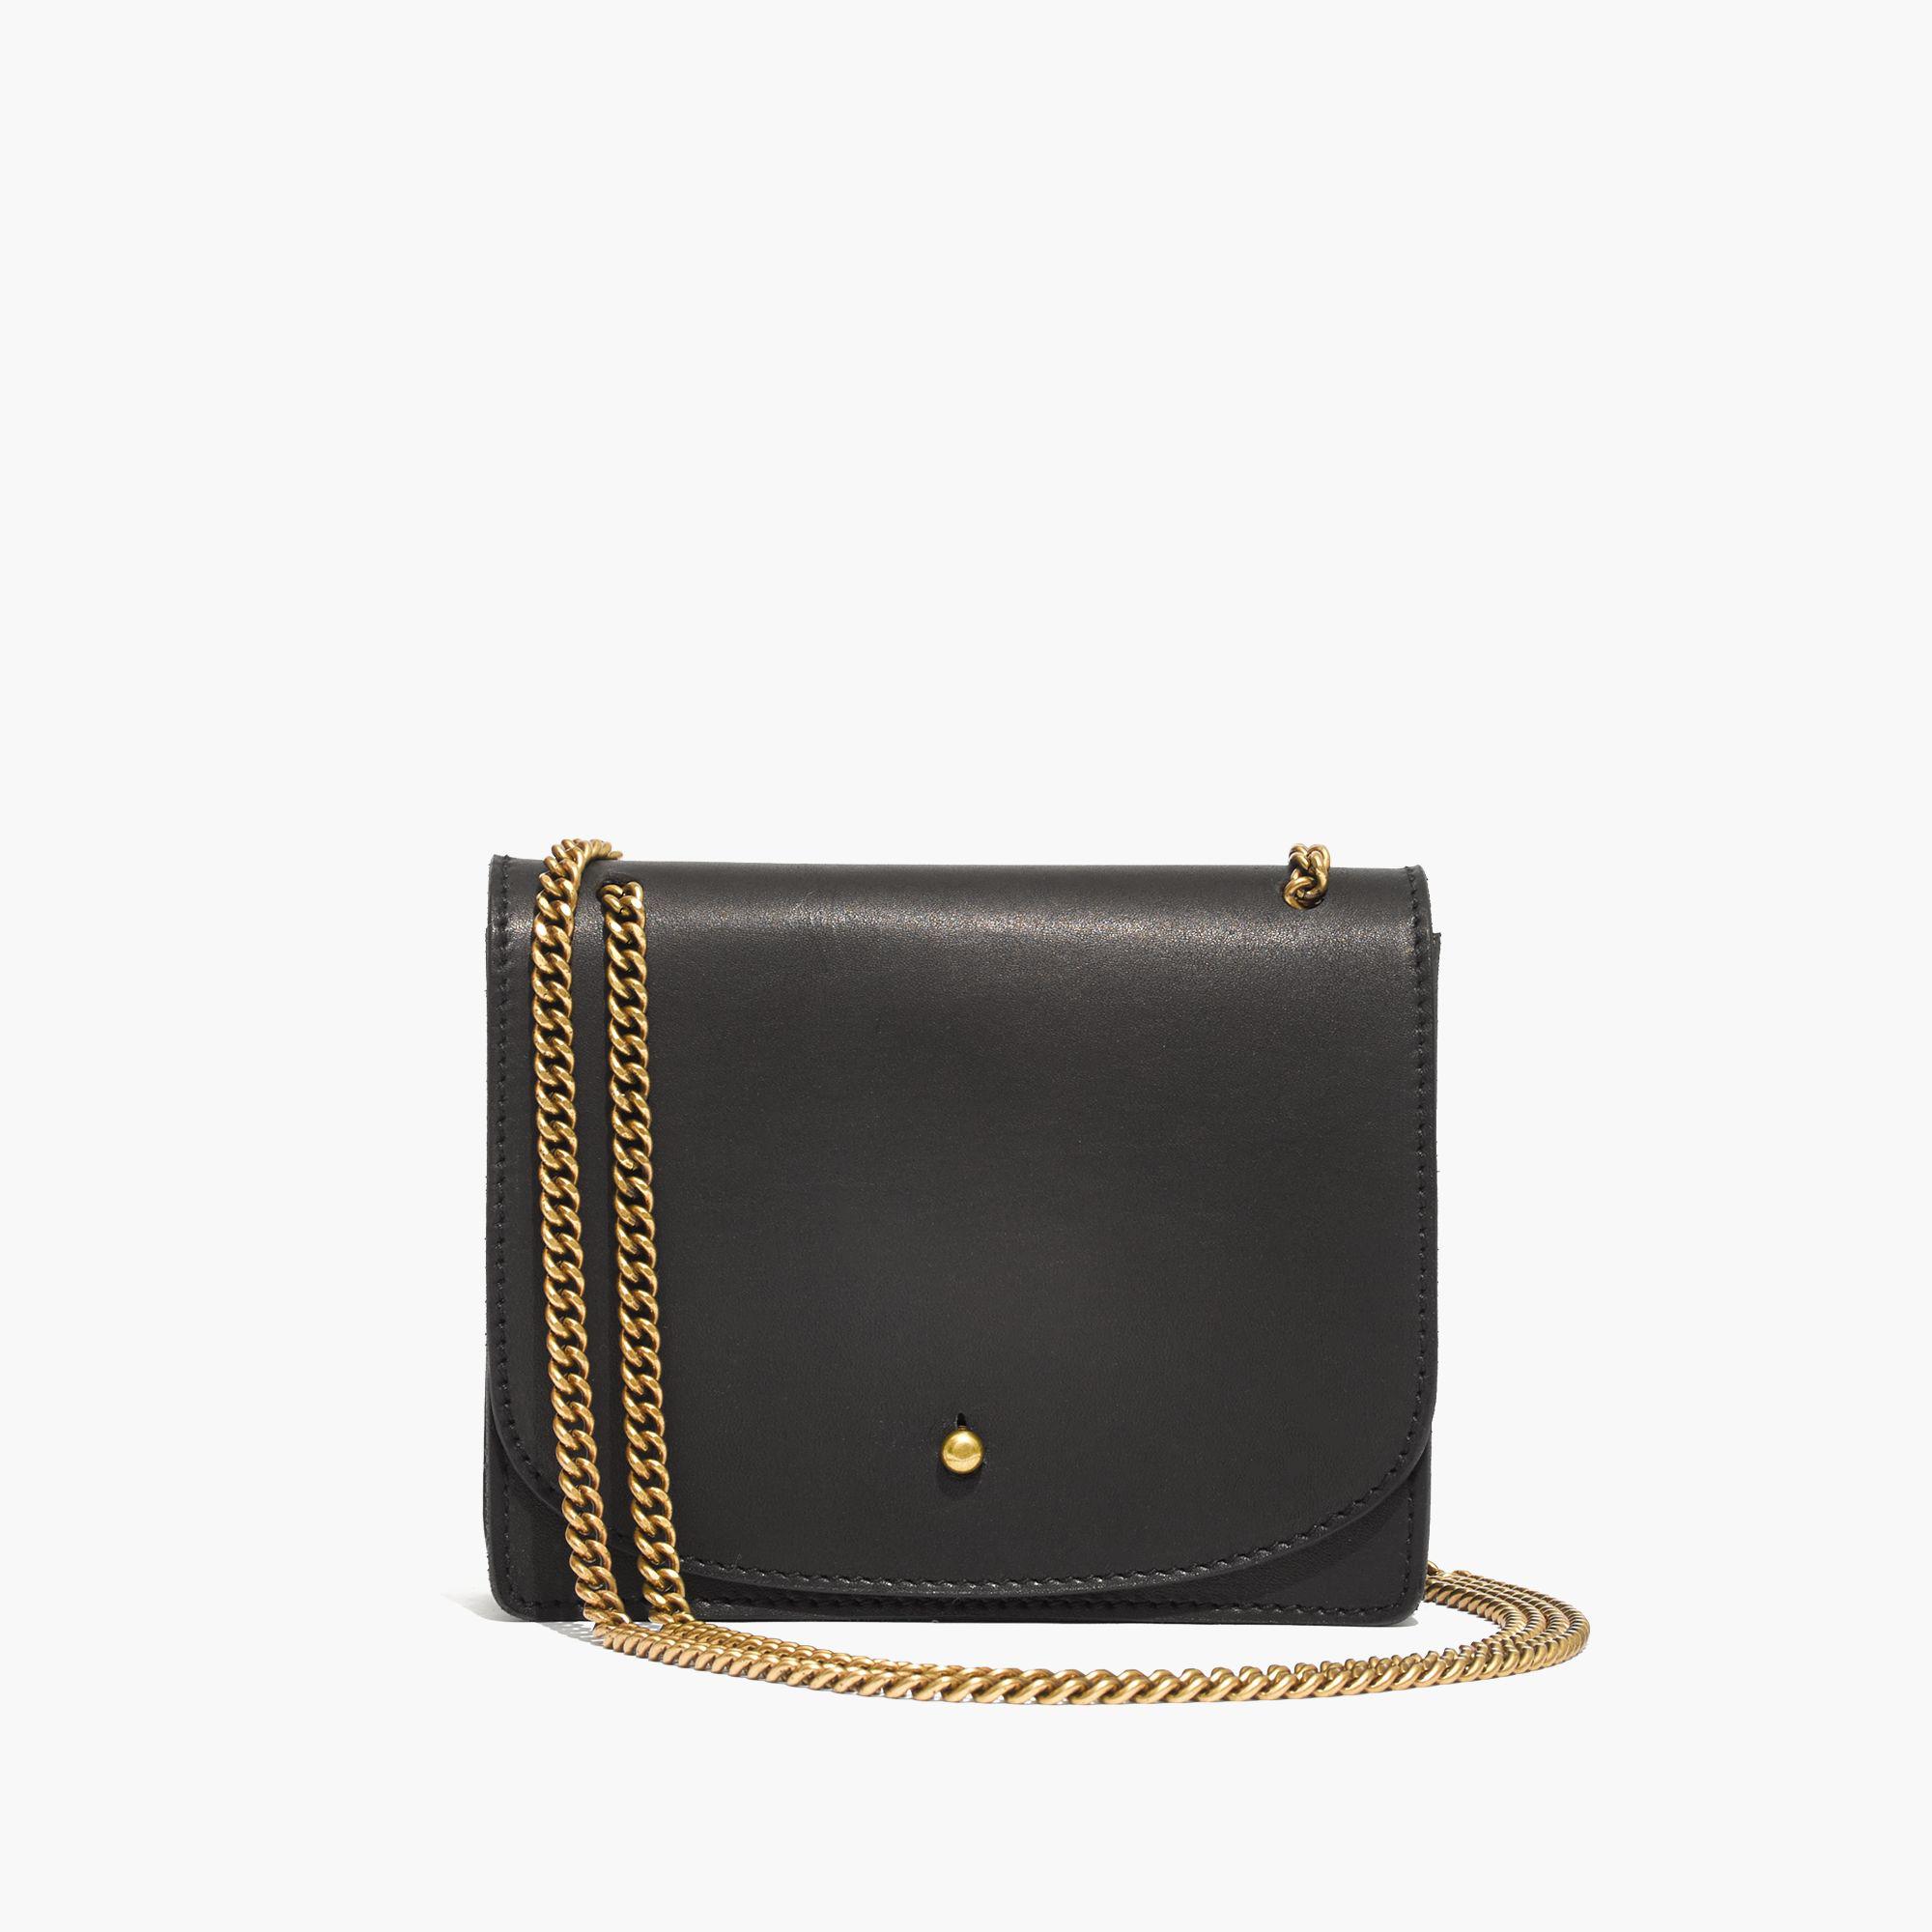 Madewell Leather The Chain Crossbody Bag in Black - Lyst